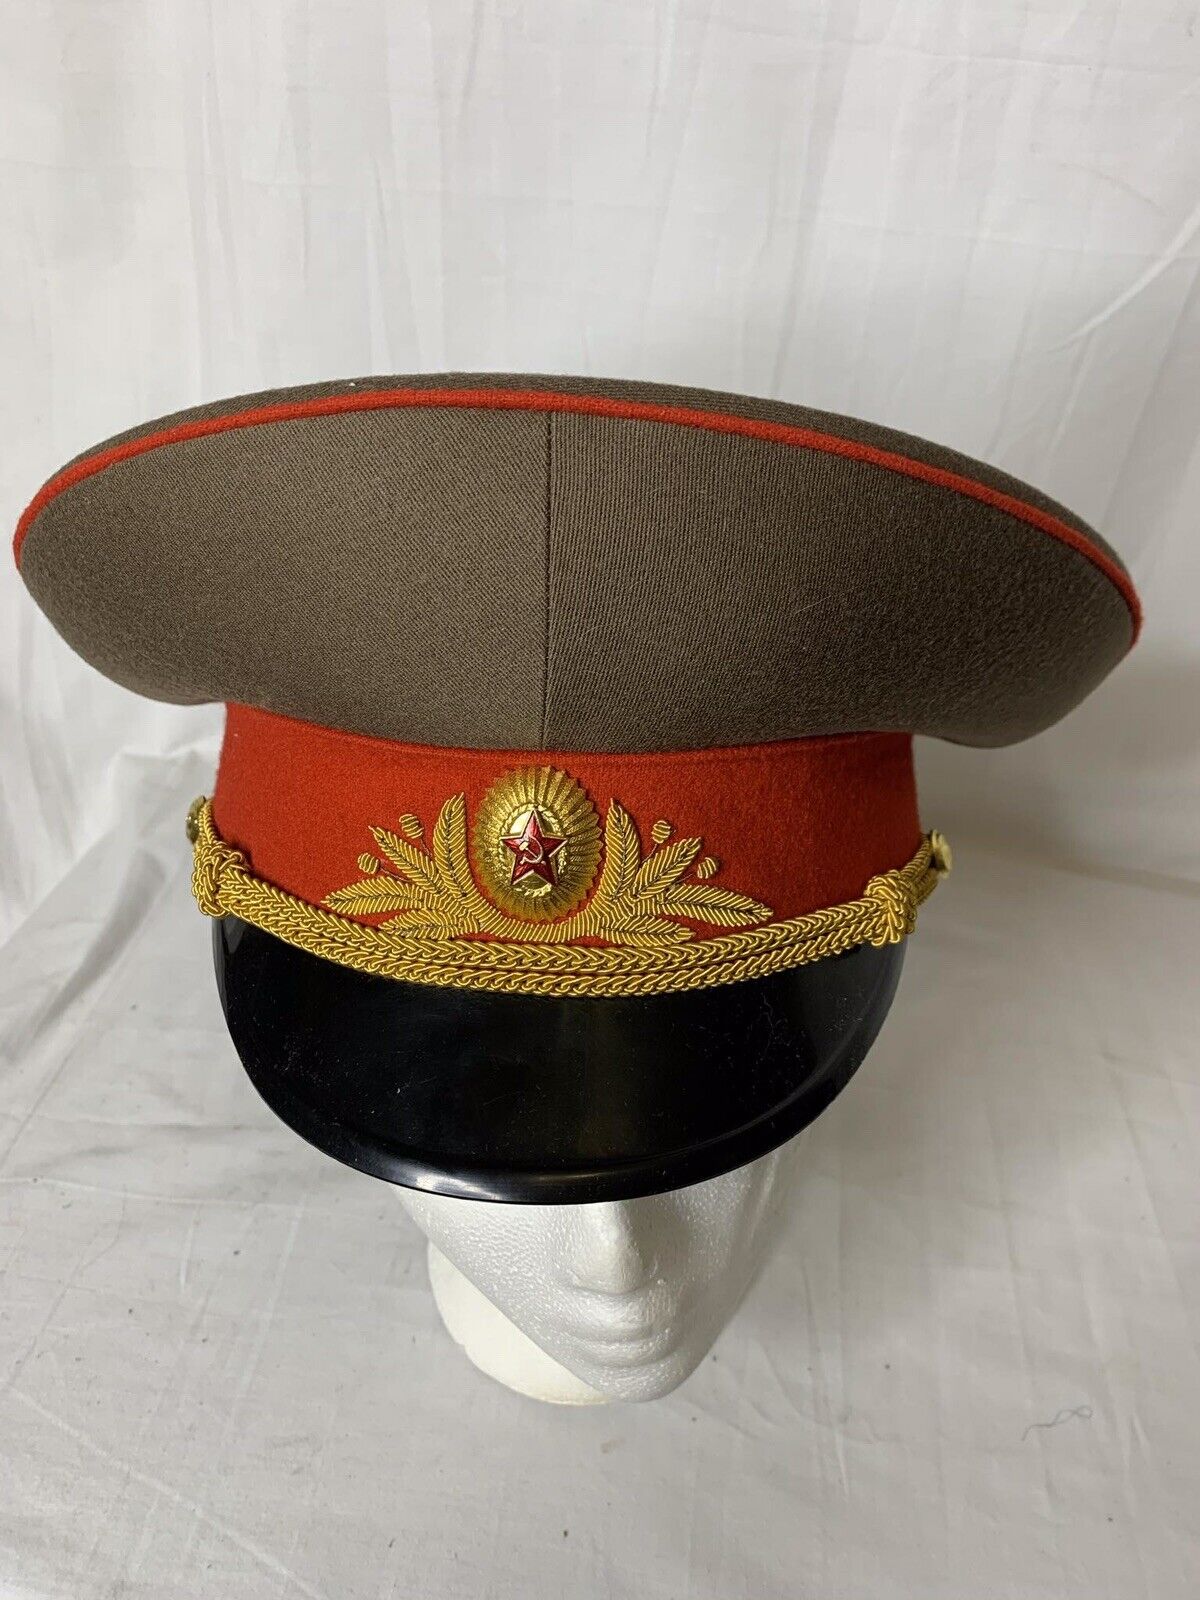 = Soviet (Russian, USSR) General's Visor CAP with Red Band  =